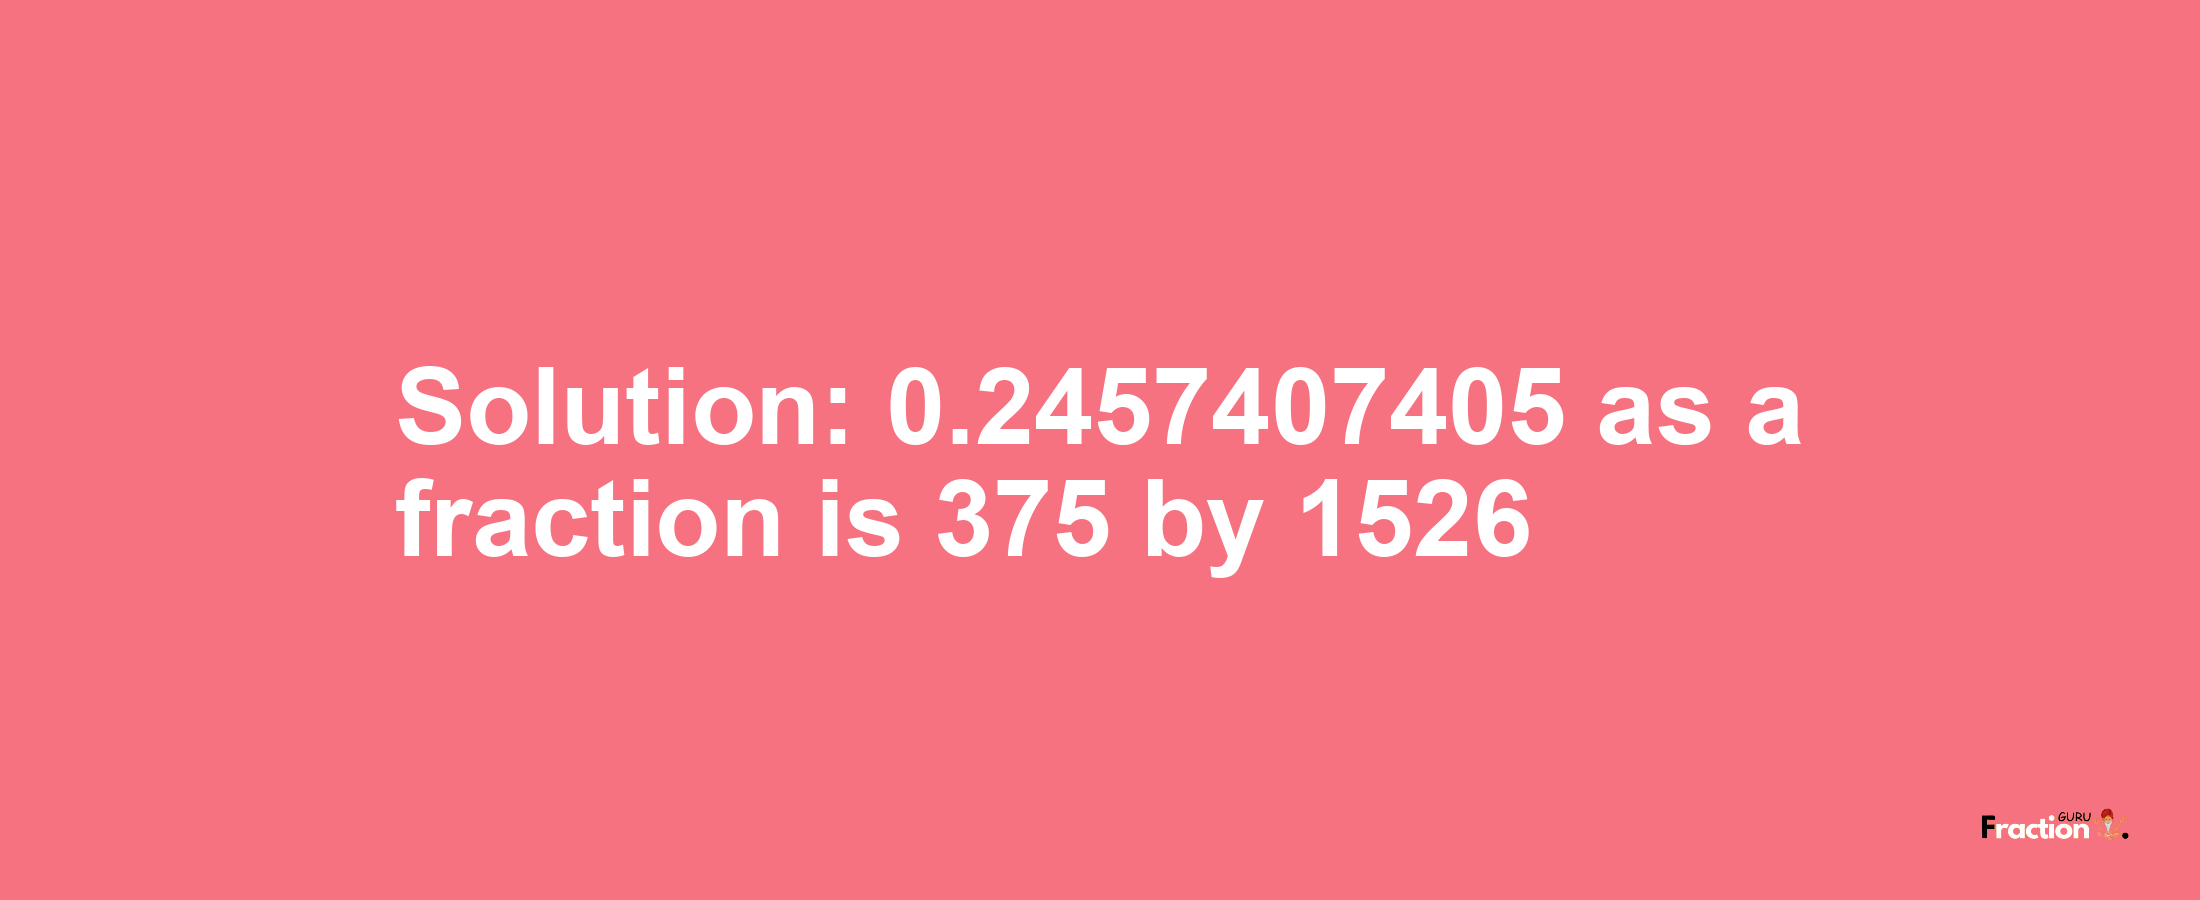 Solution:0.2457407405 as a fraction is 375/1526